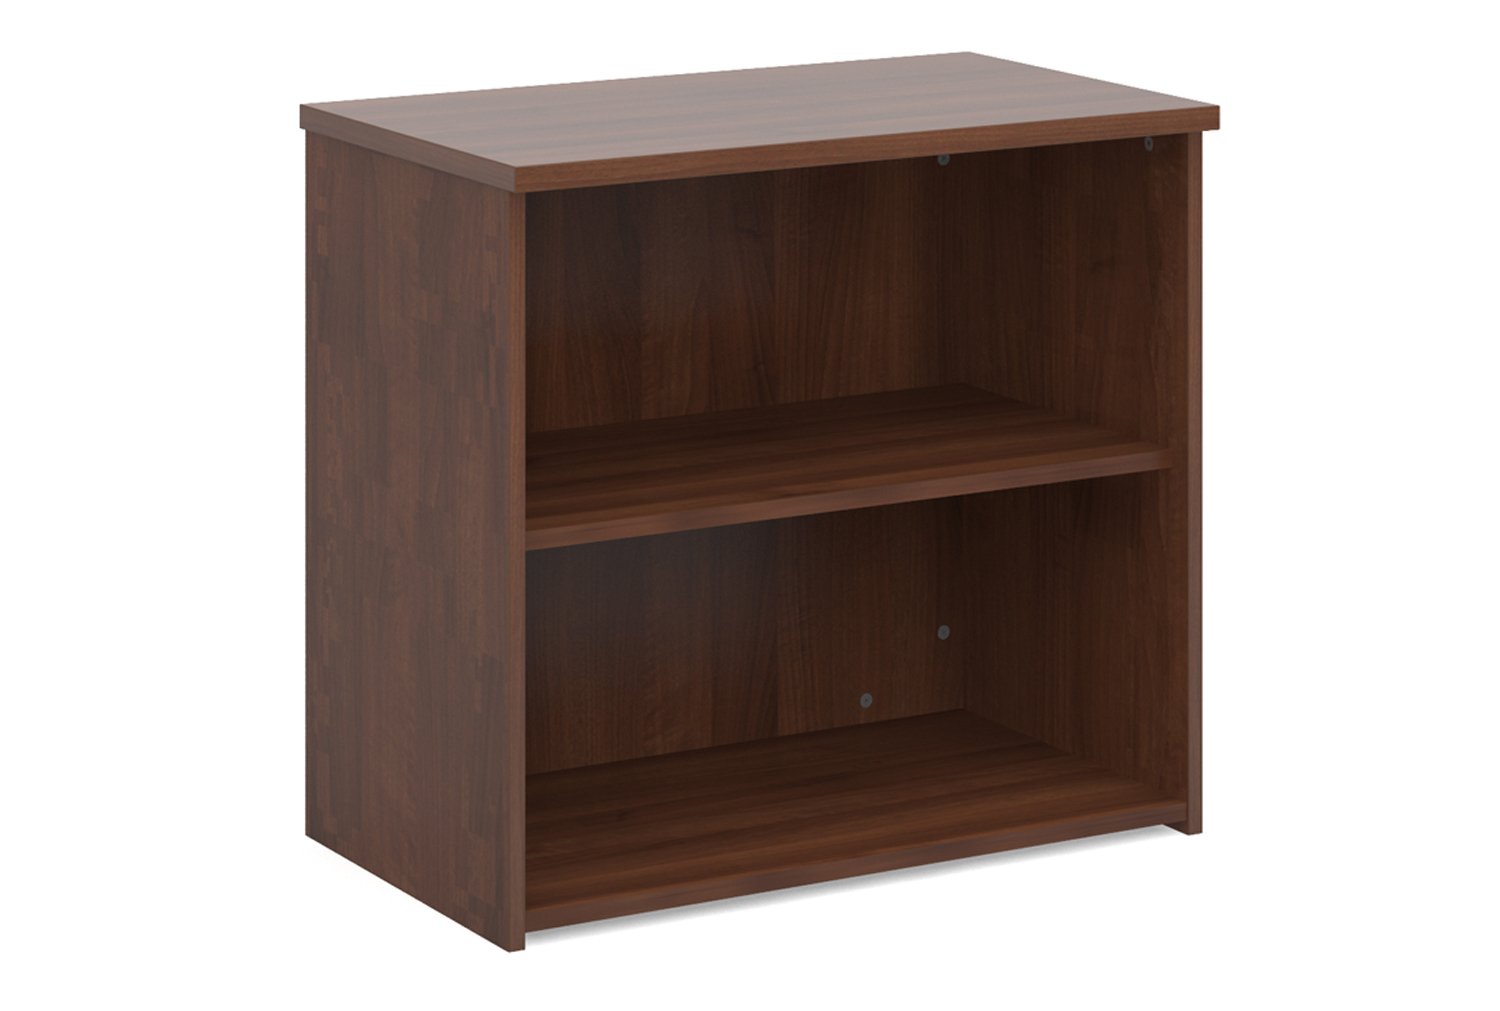 Duo Office Bookcases, 1 Shelf - 80wx47dx74h (cm), Walnut, Express Delivery